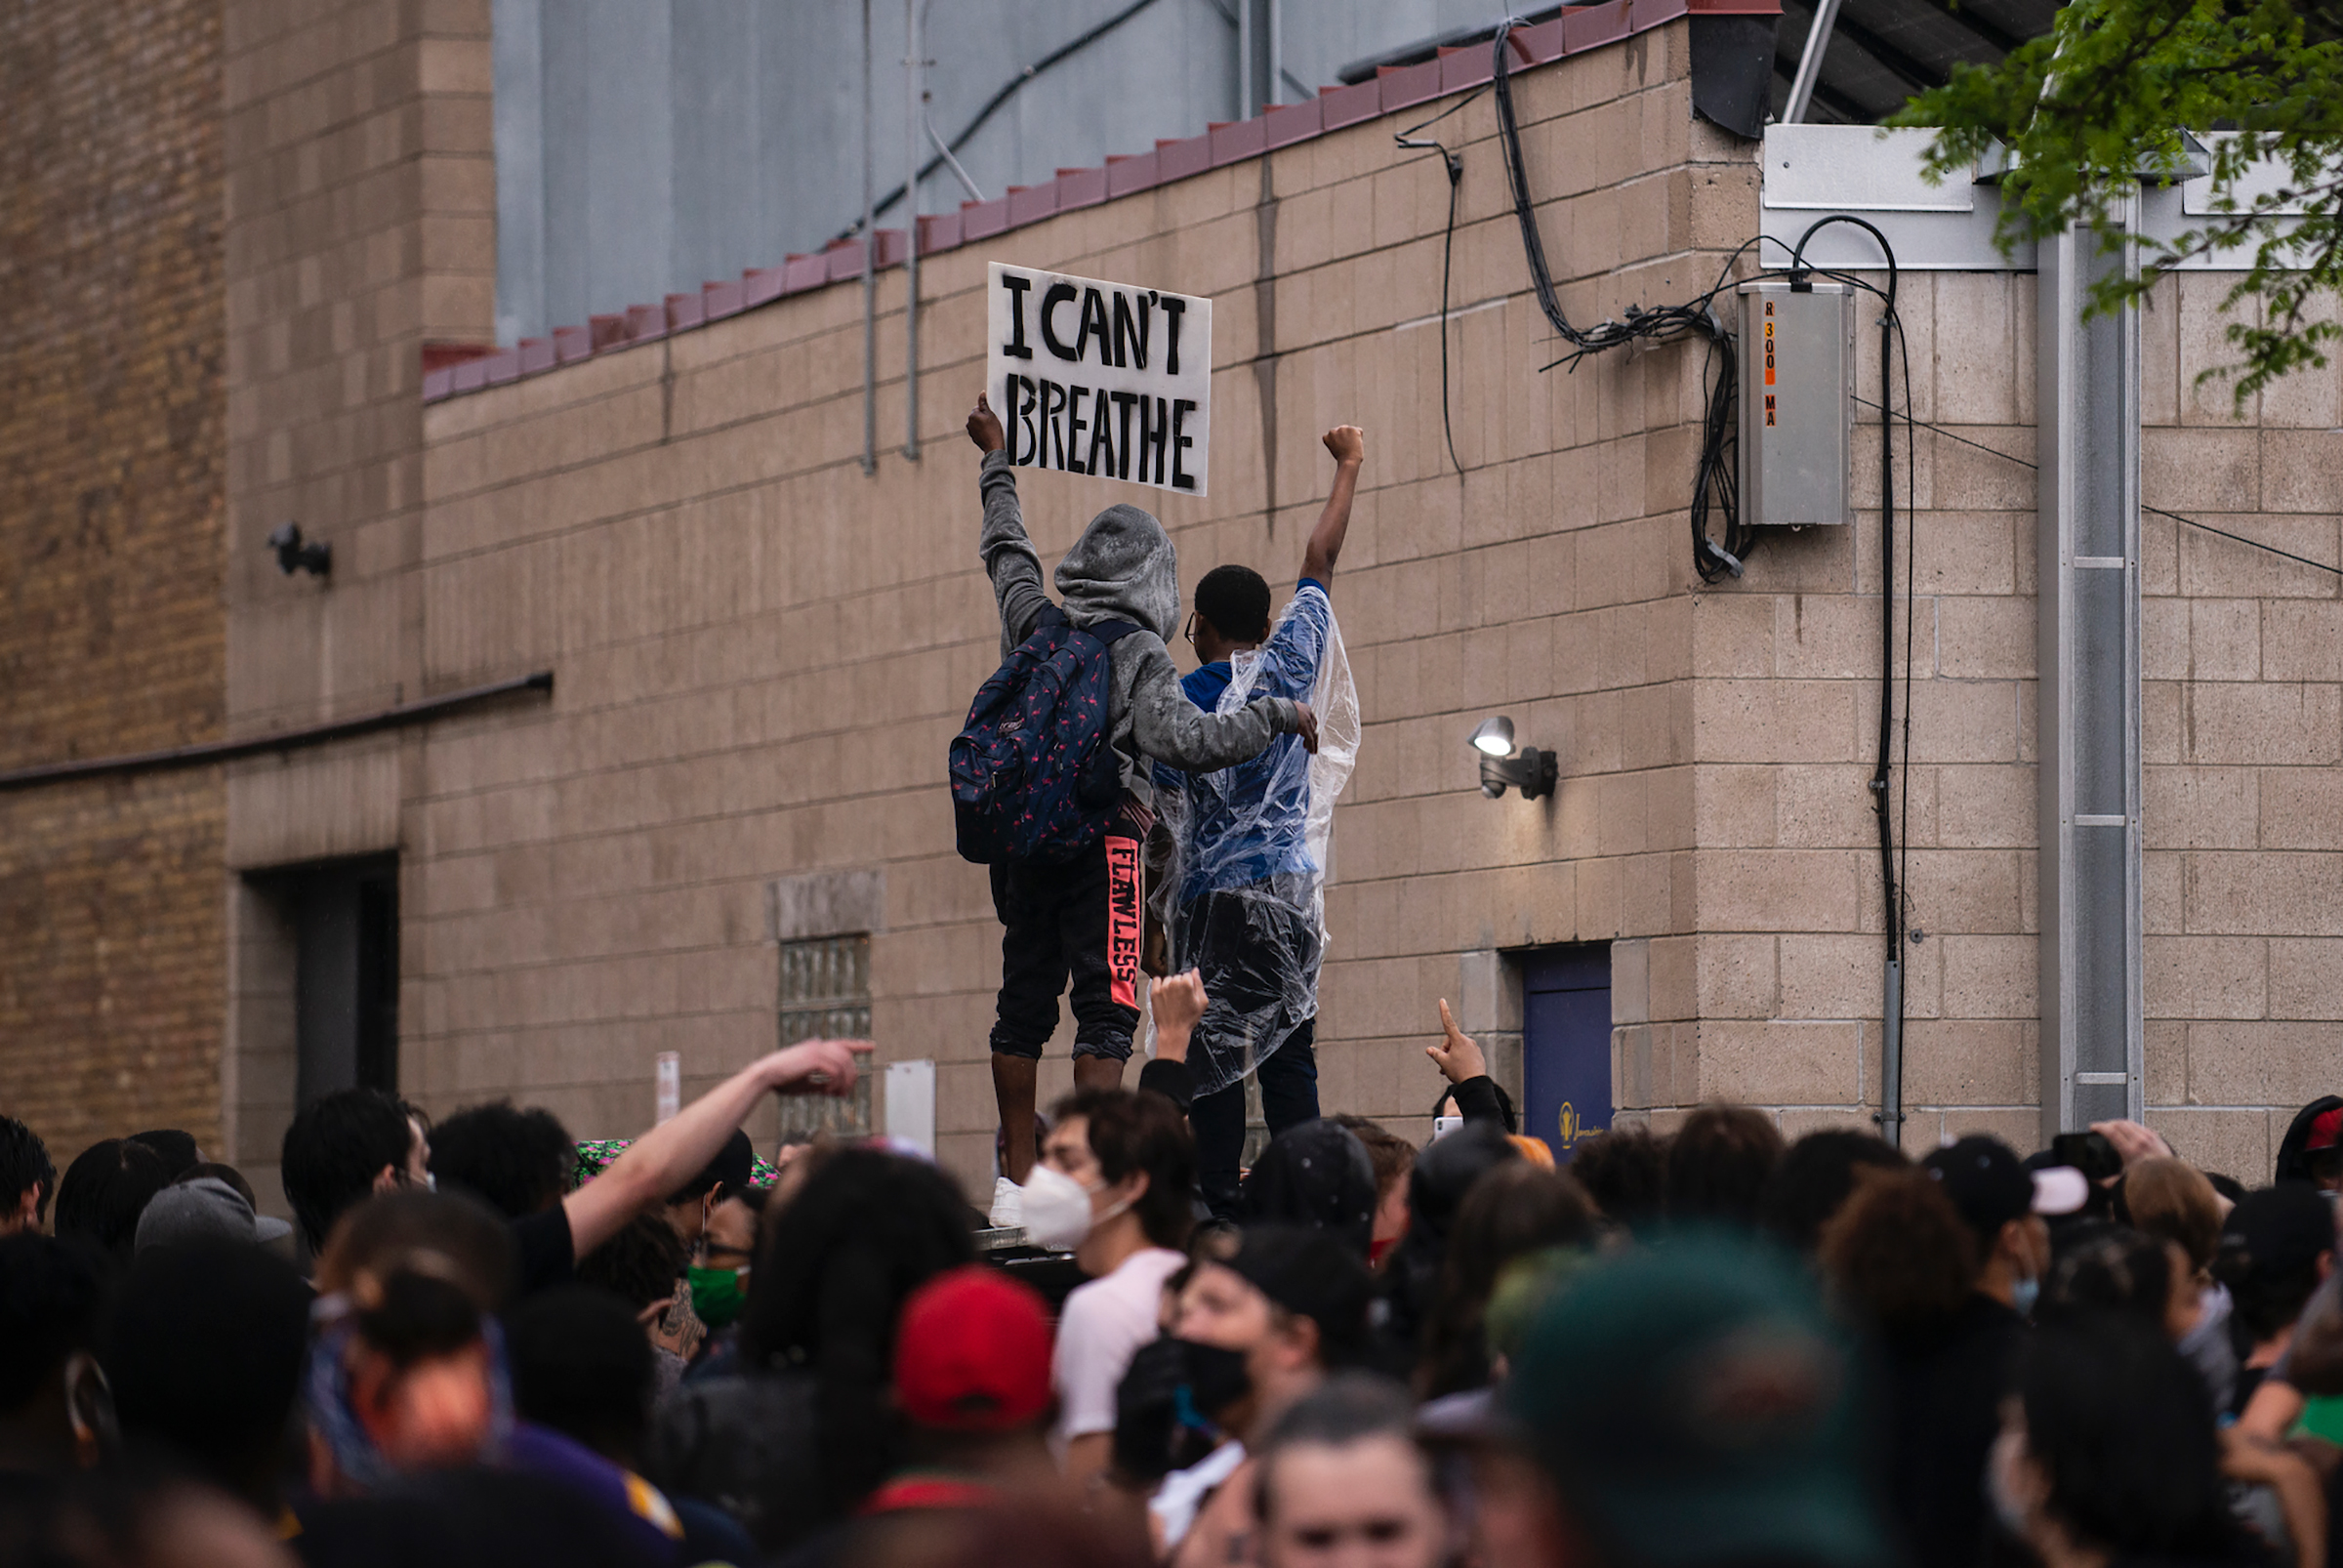 Protesters demonstrate against the death of George Floyd outside the 3rd Police Precinct station in Minneapolis on May 26. (Stephen Maturen—Getty Images)